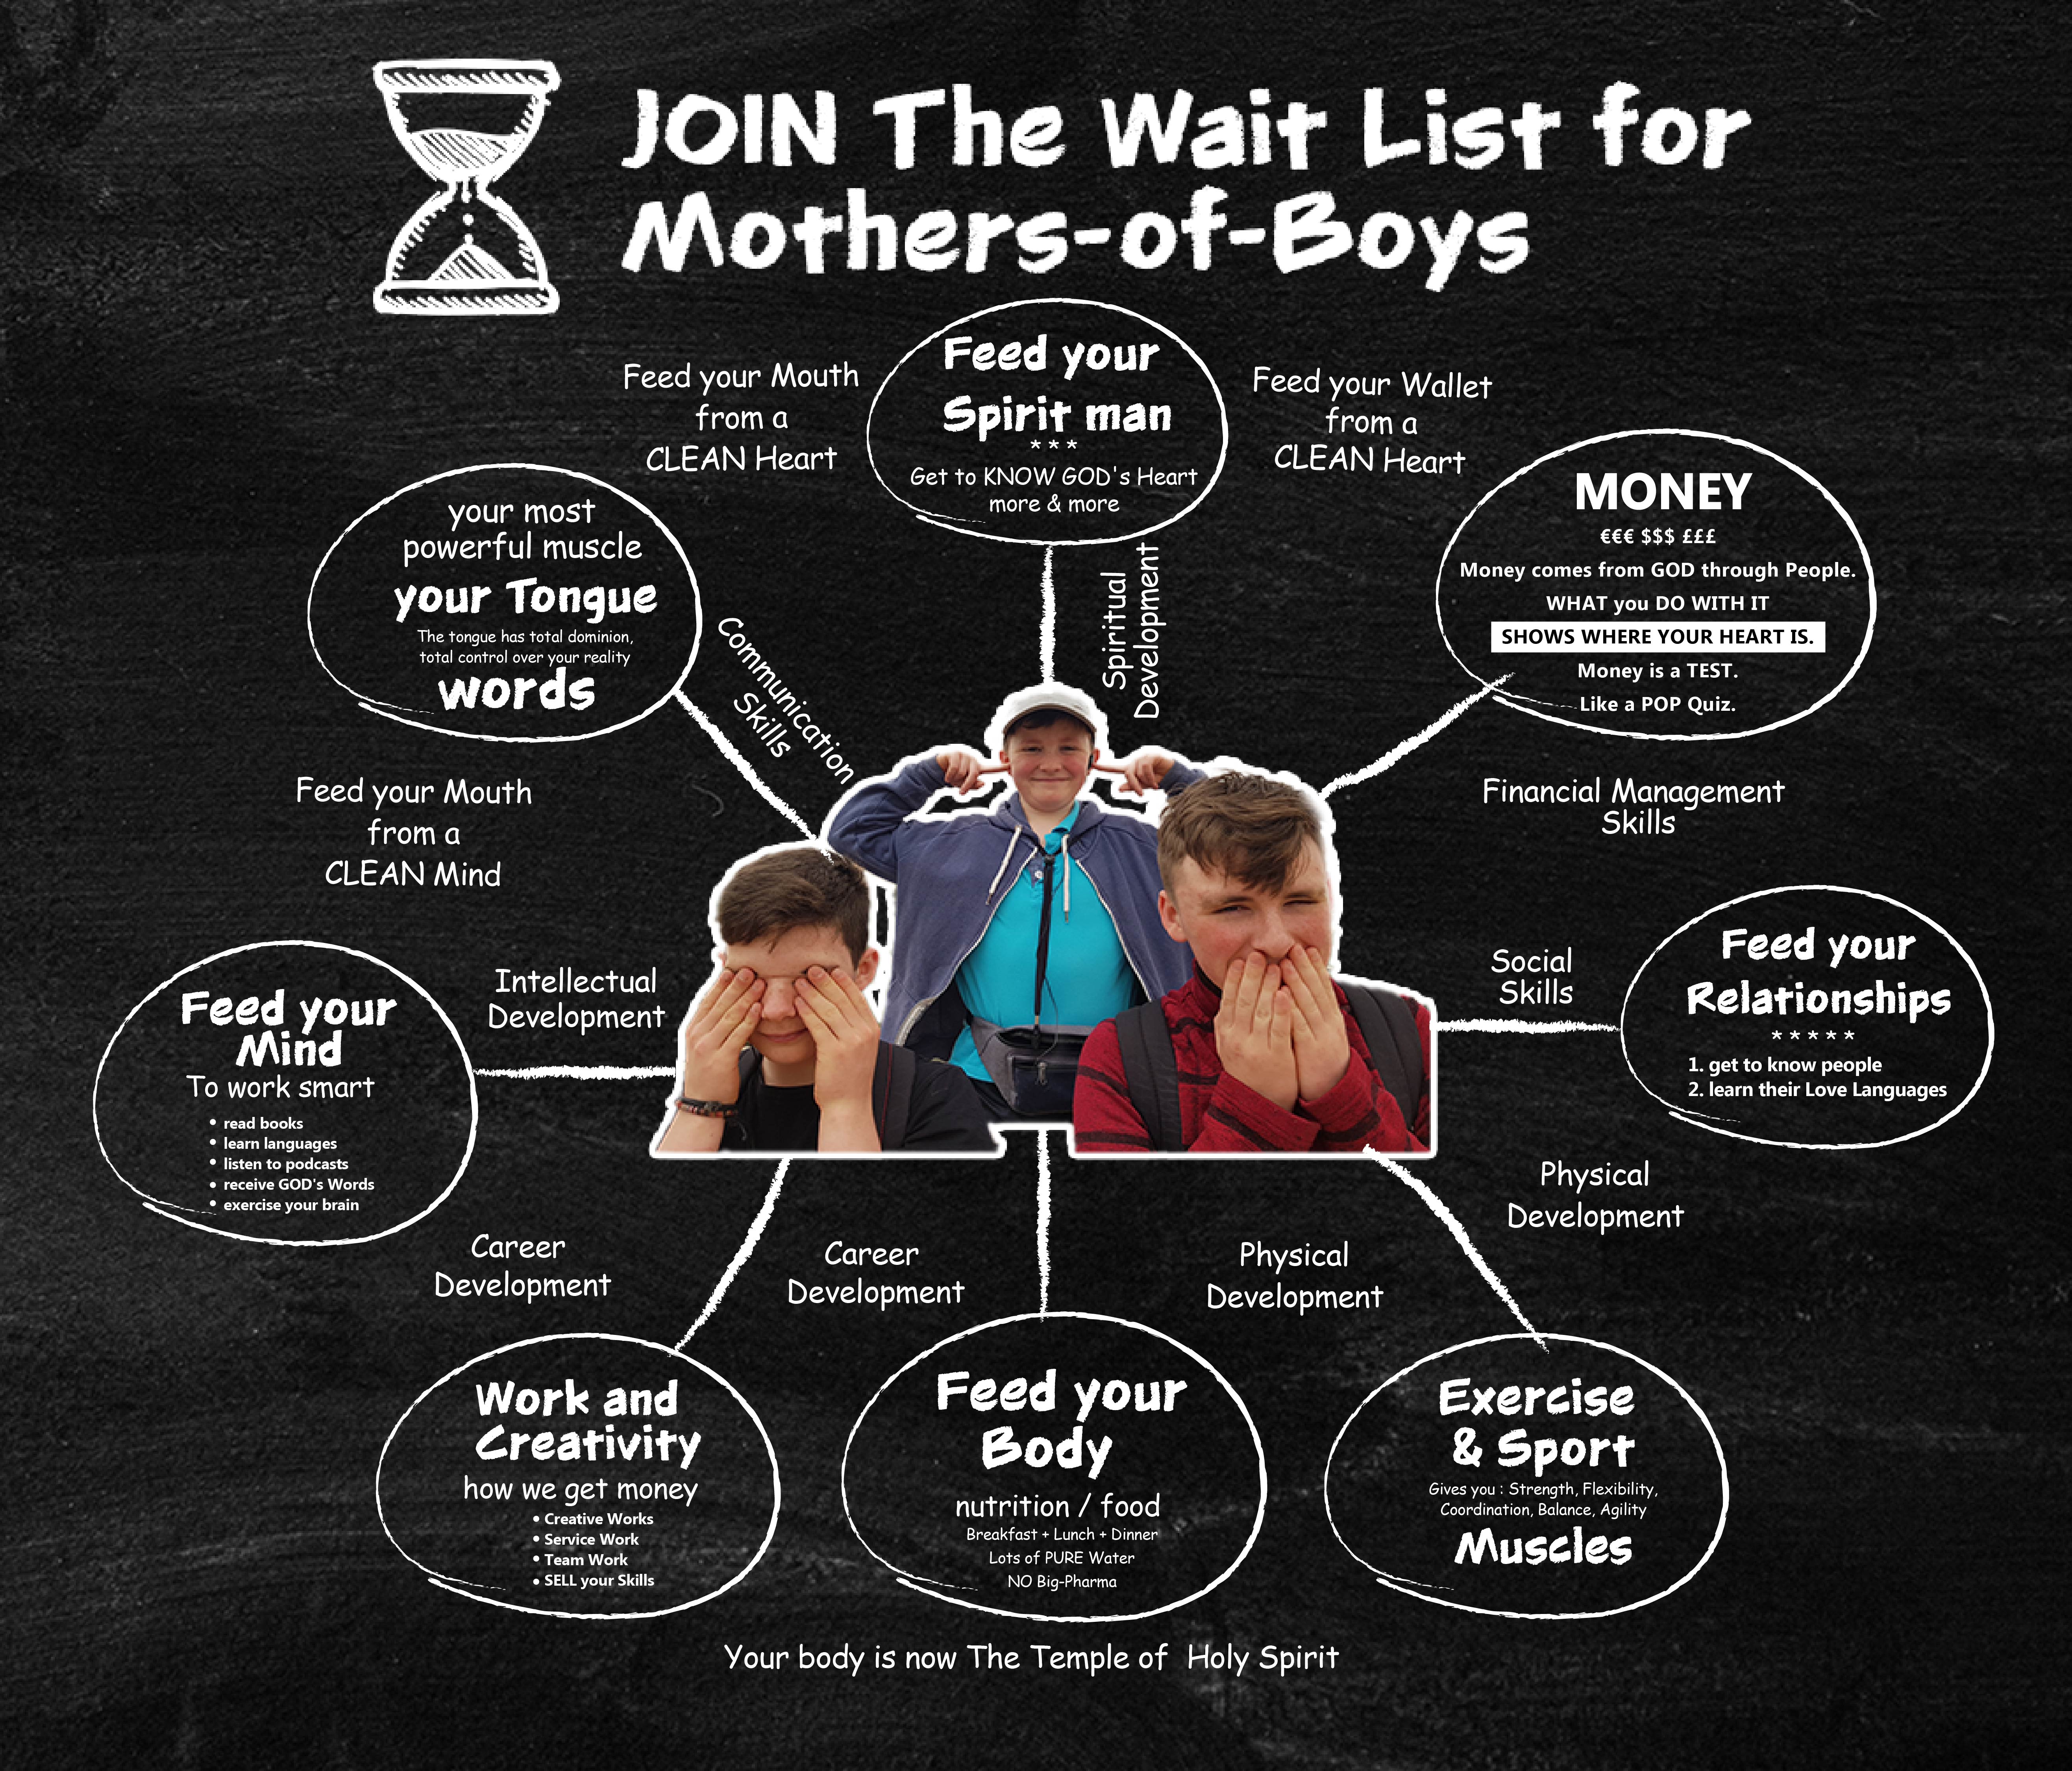 JOIN The Wait List for Mothers-of-Boys